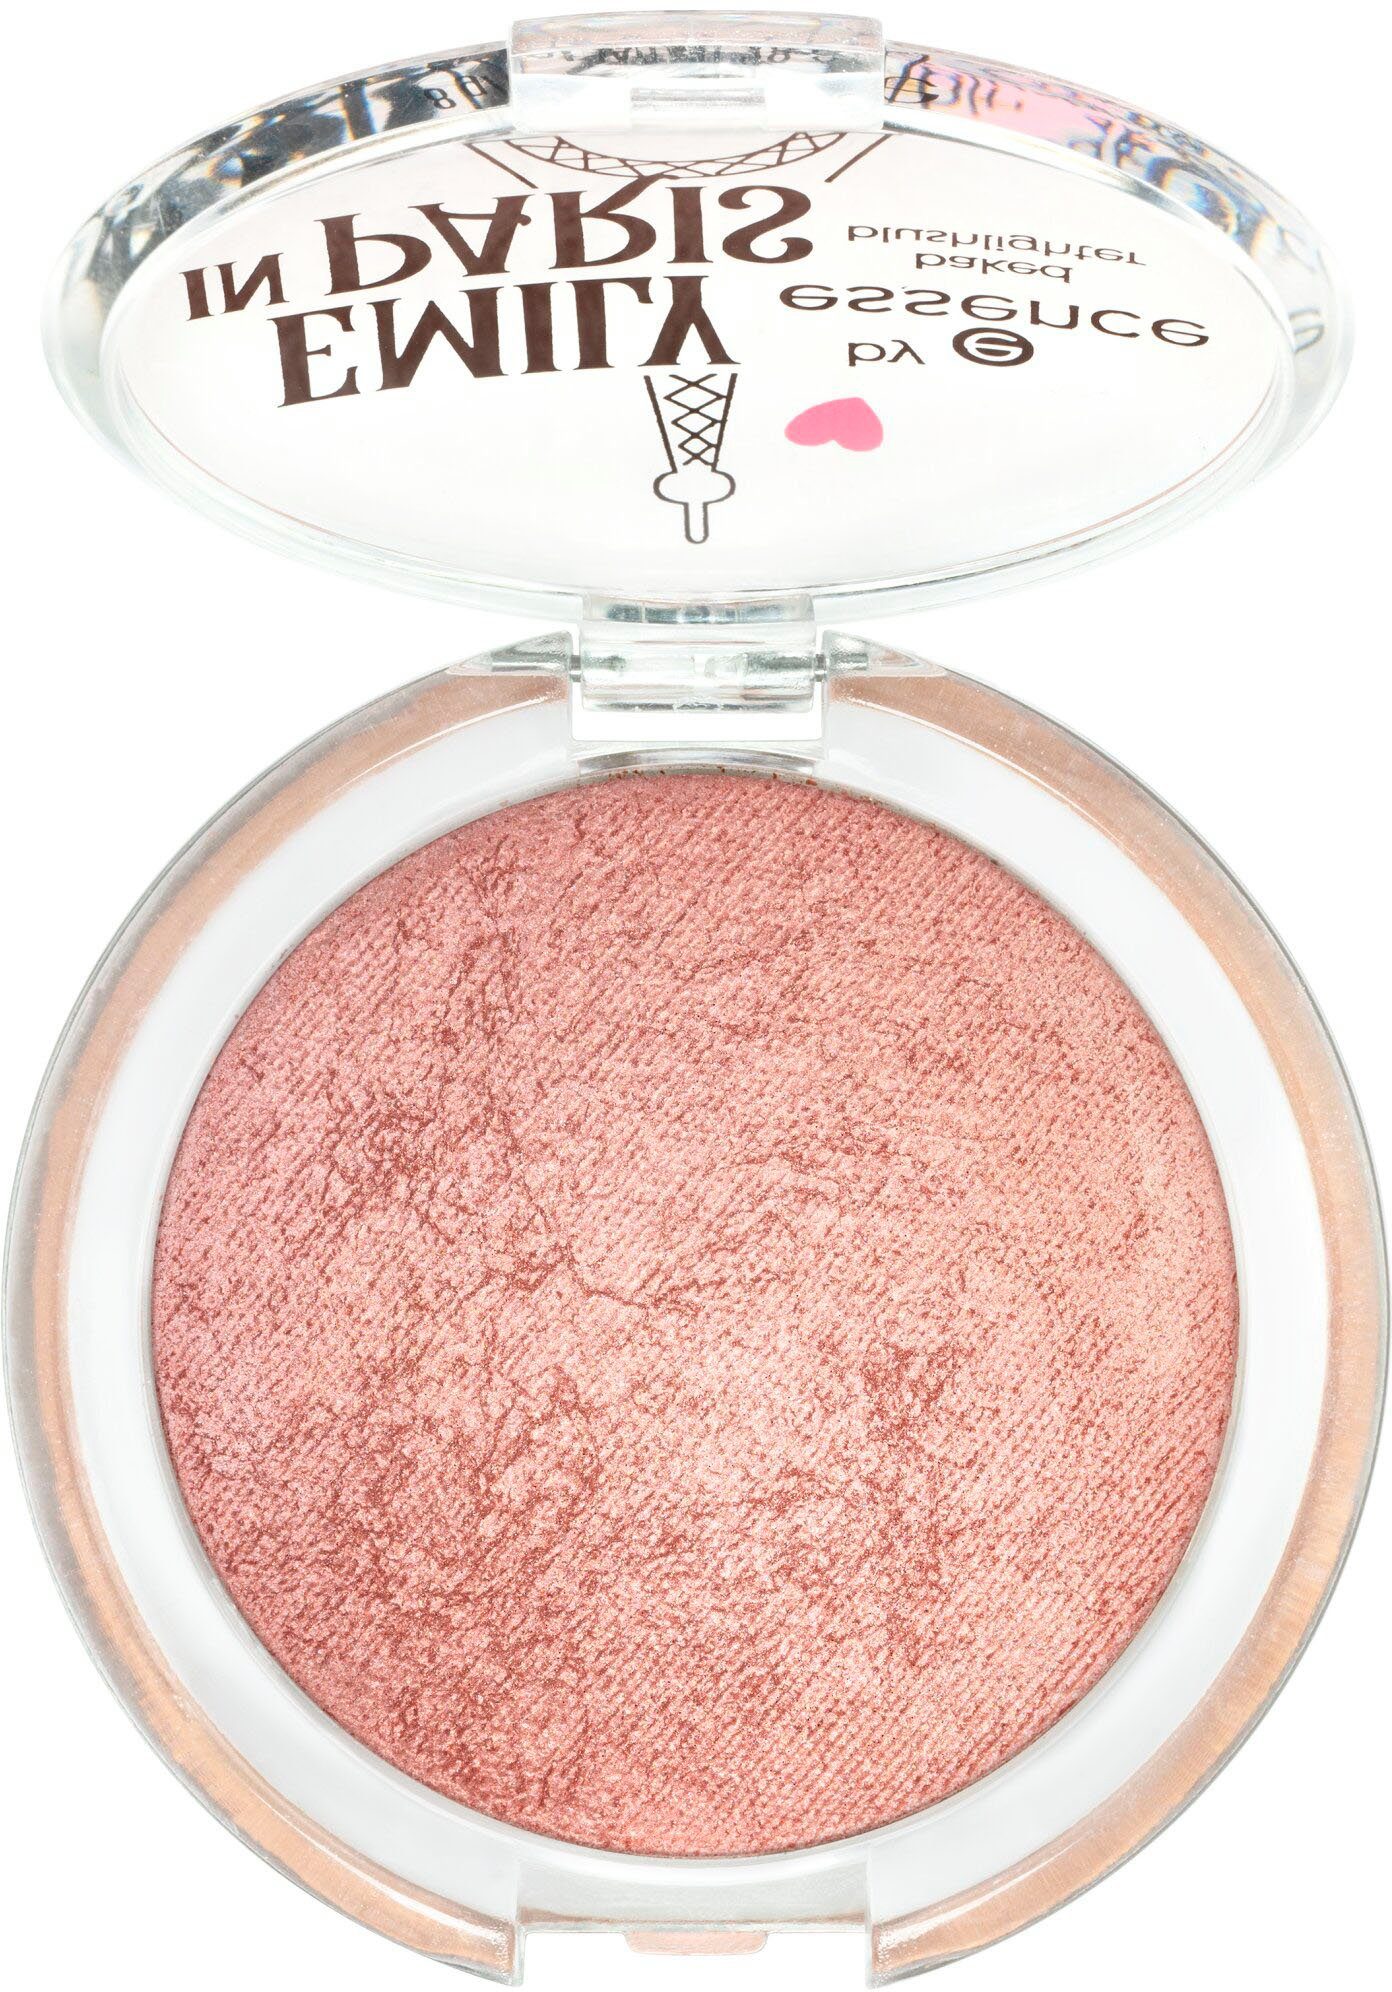 Essence Rouge essence blushlighter PARIS IN baked by EMILY